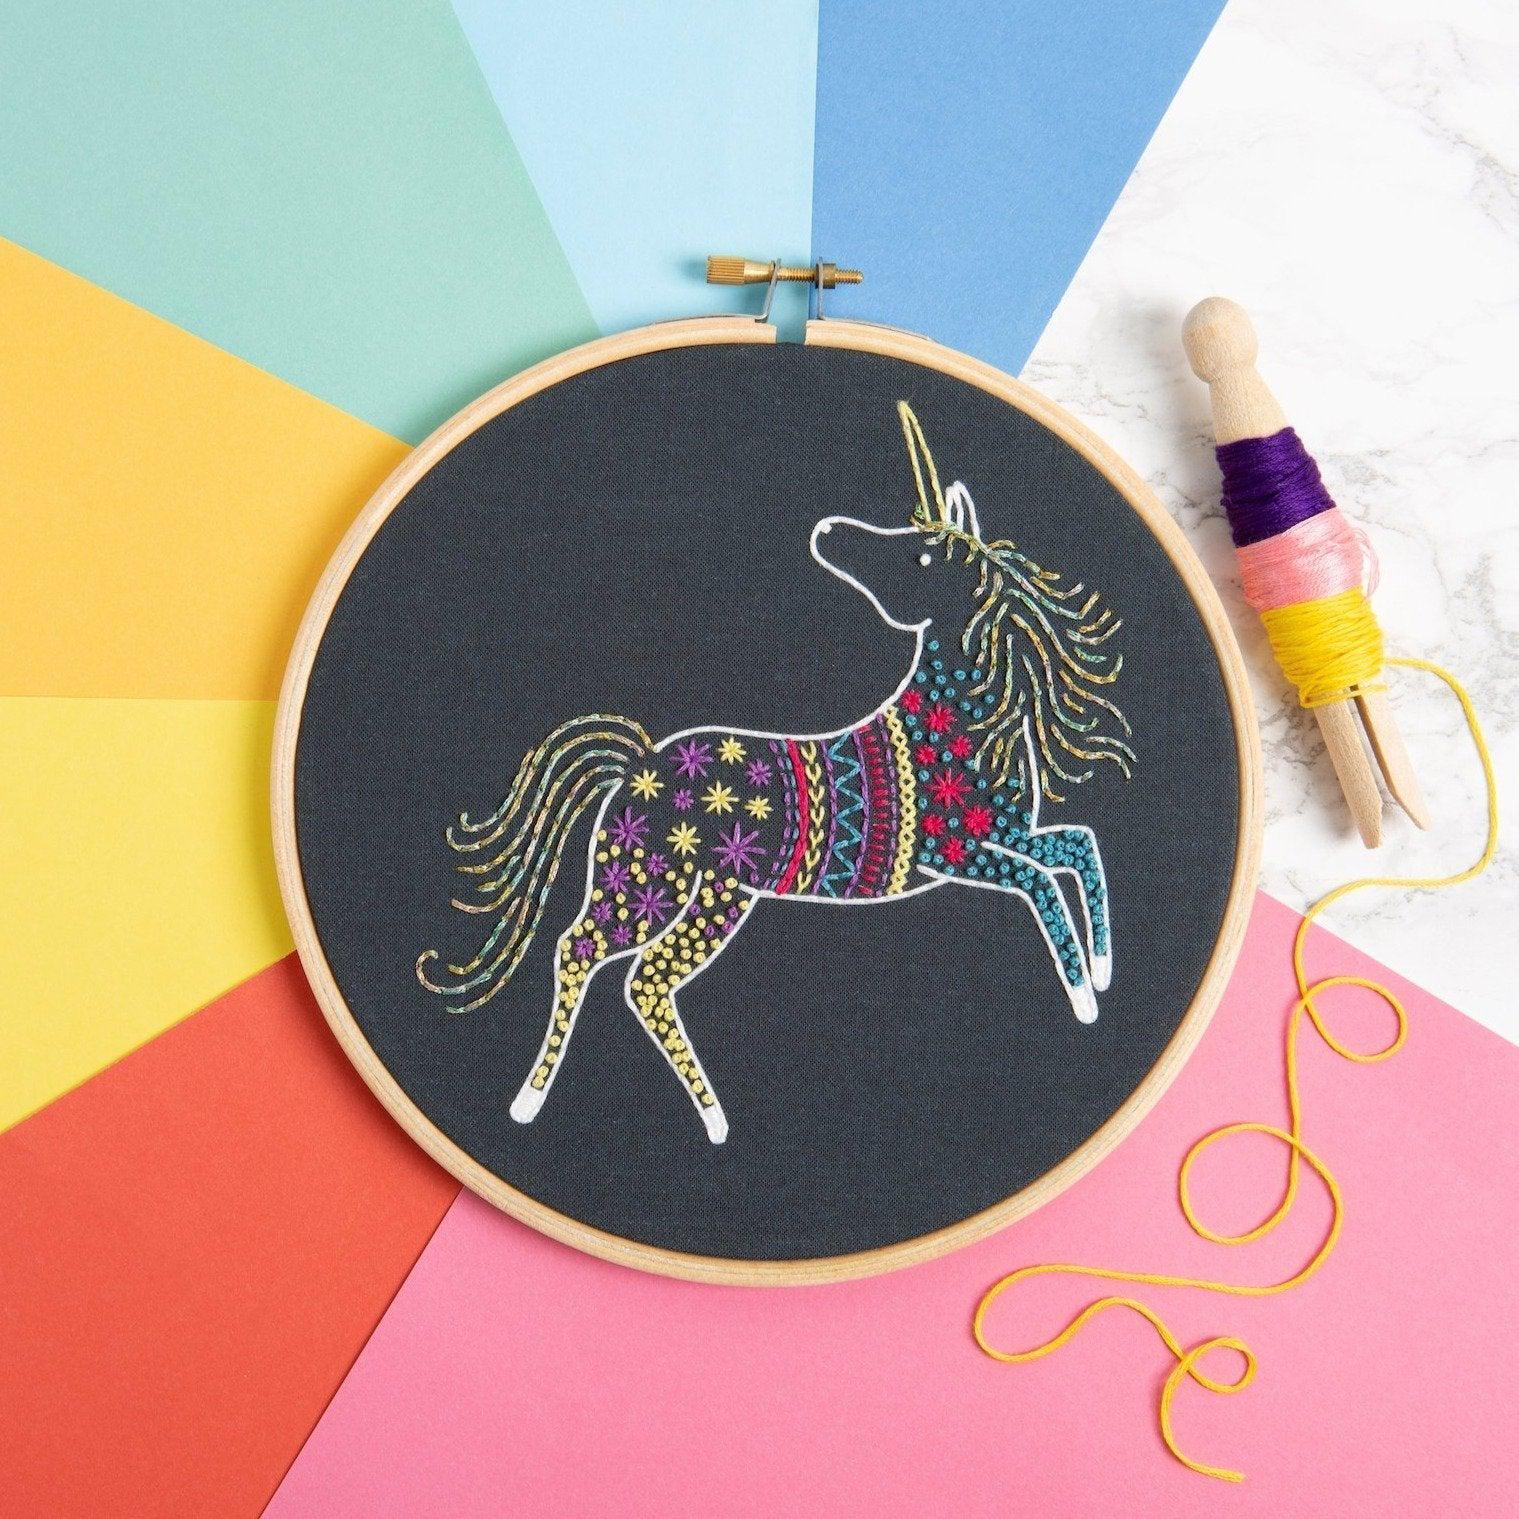 Hawthorn Handmade-Unicorn on Black Embroidery Kit-embroidery kit-gather here online